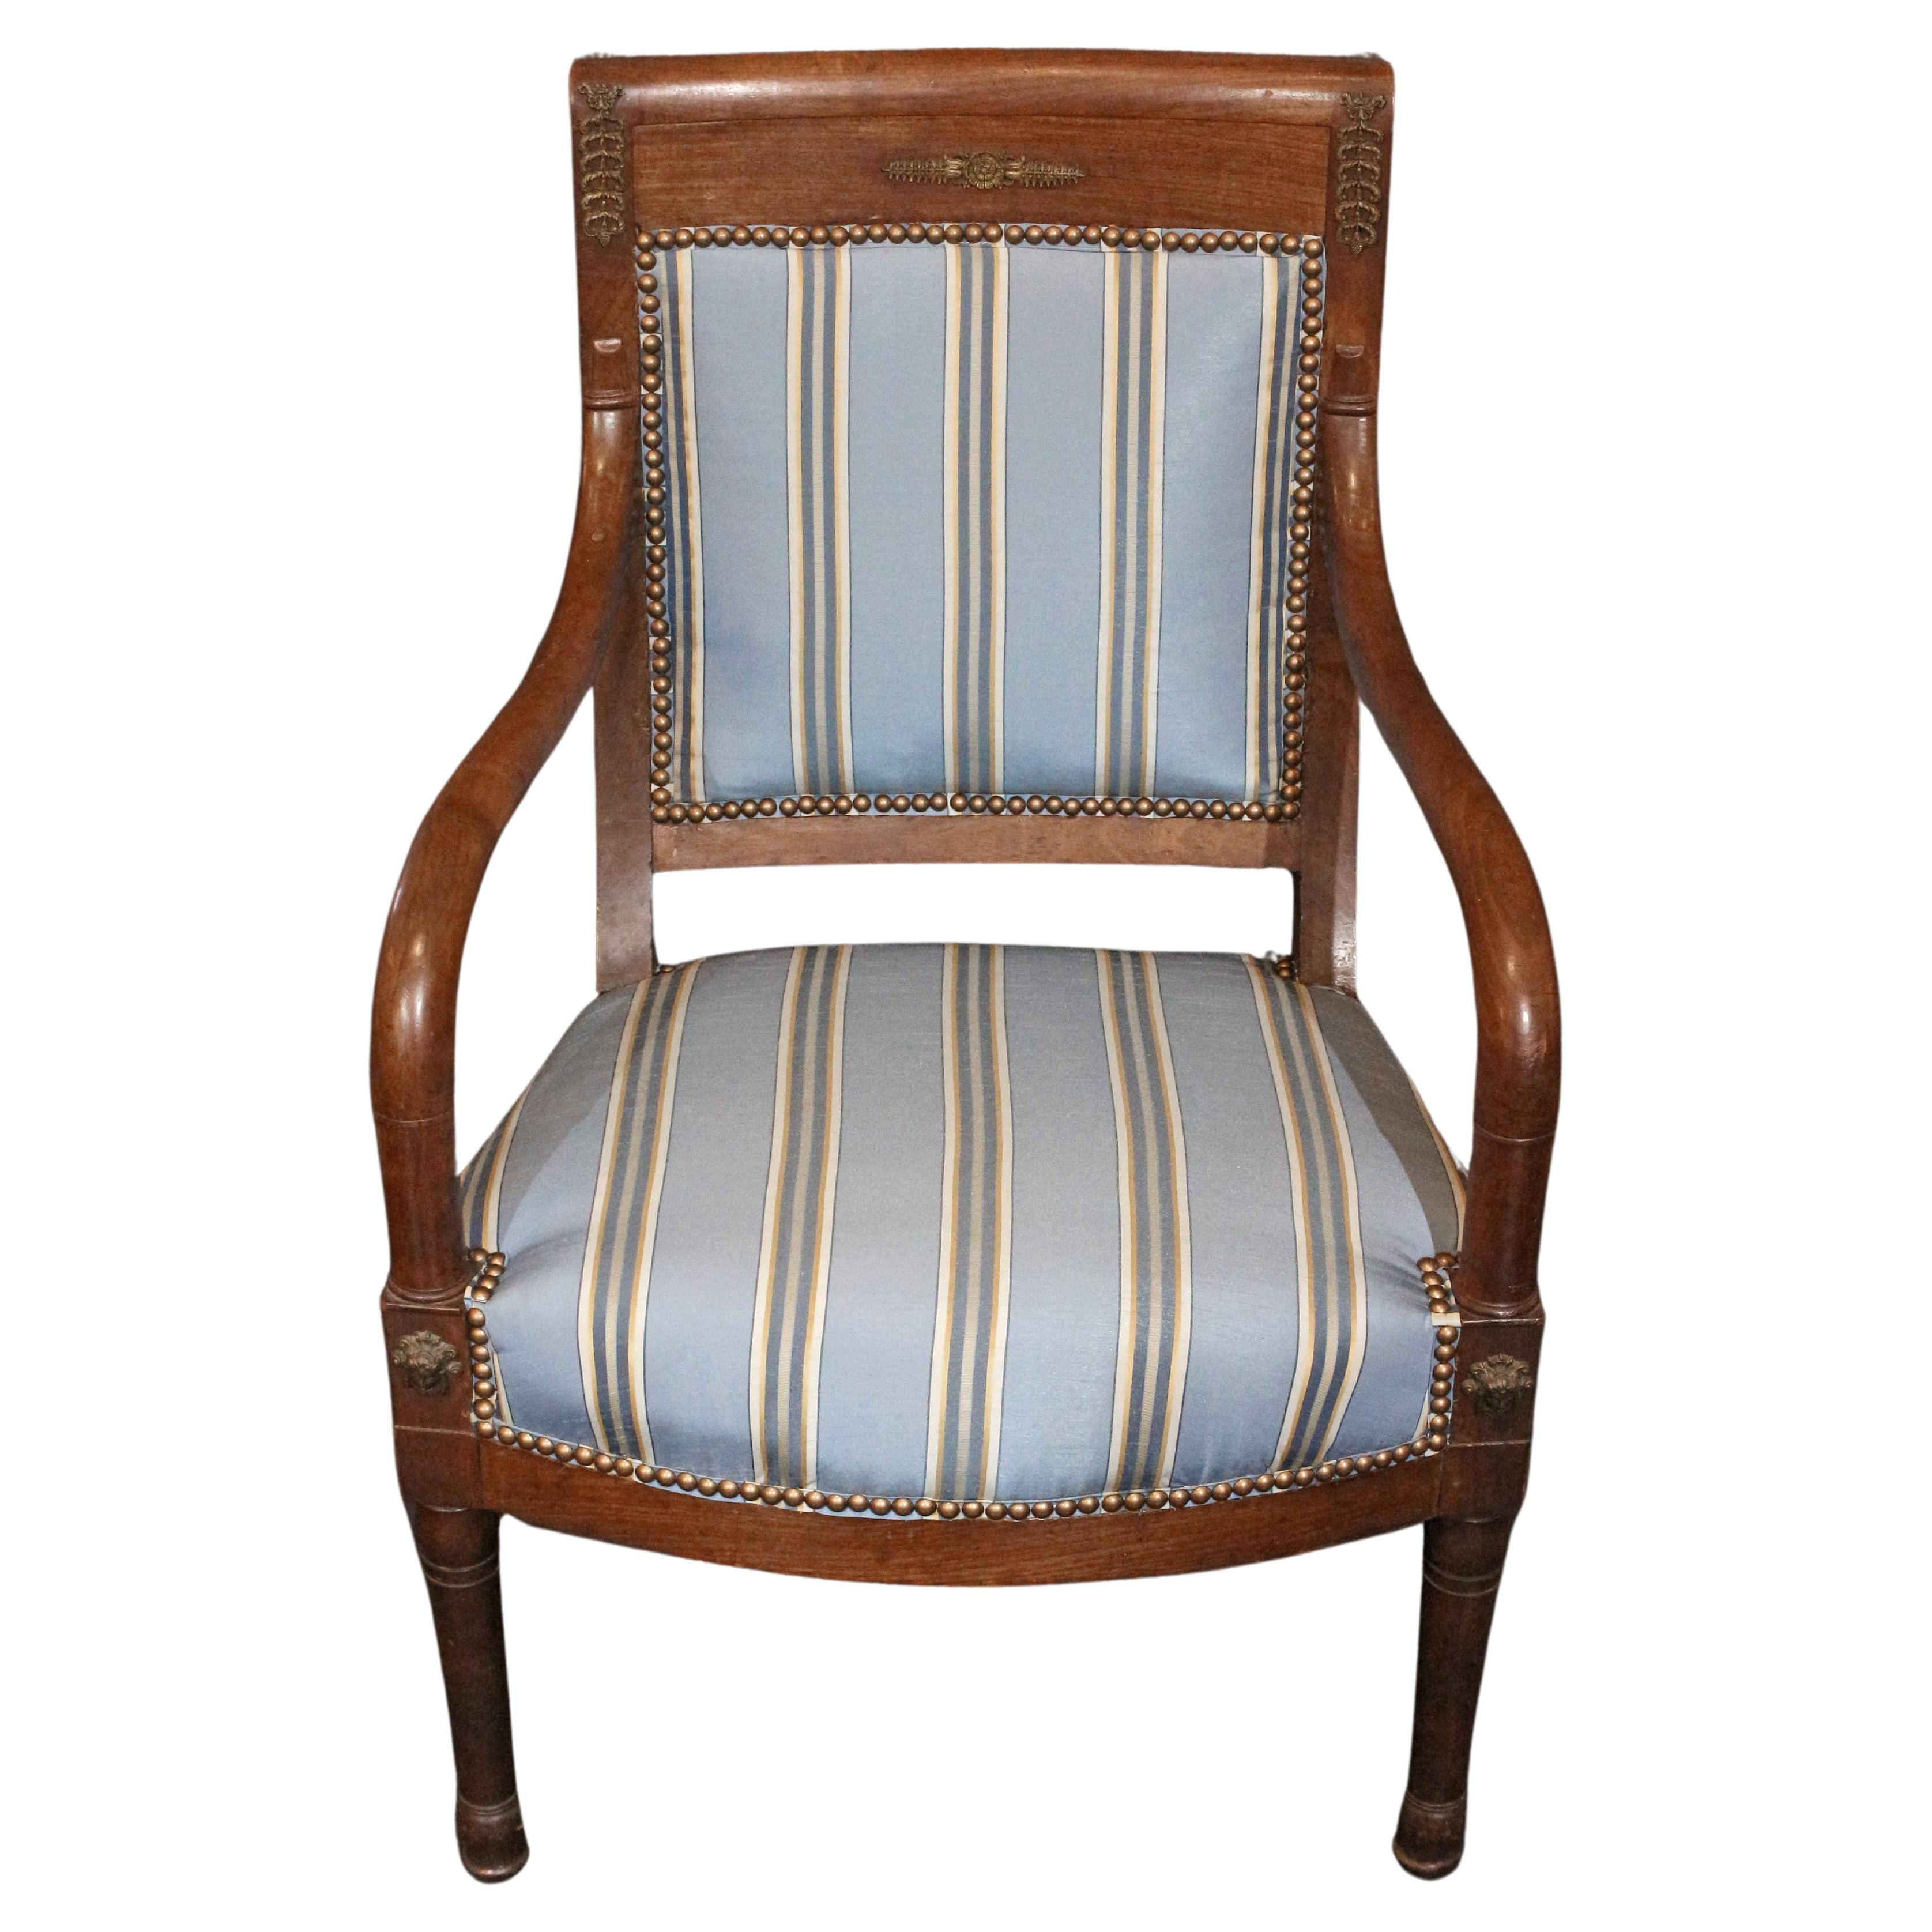 Circa 1800-1815 French Directoire to Empire Period Fauteuil For Sale